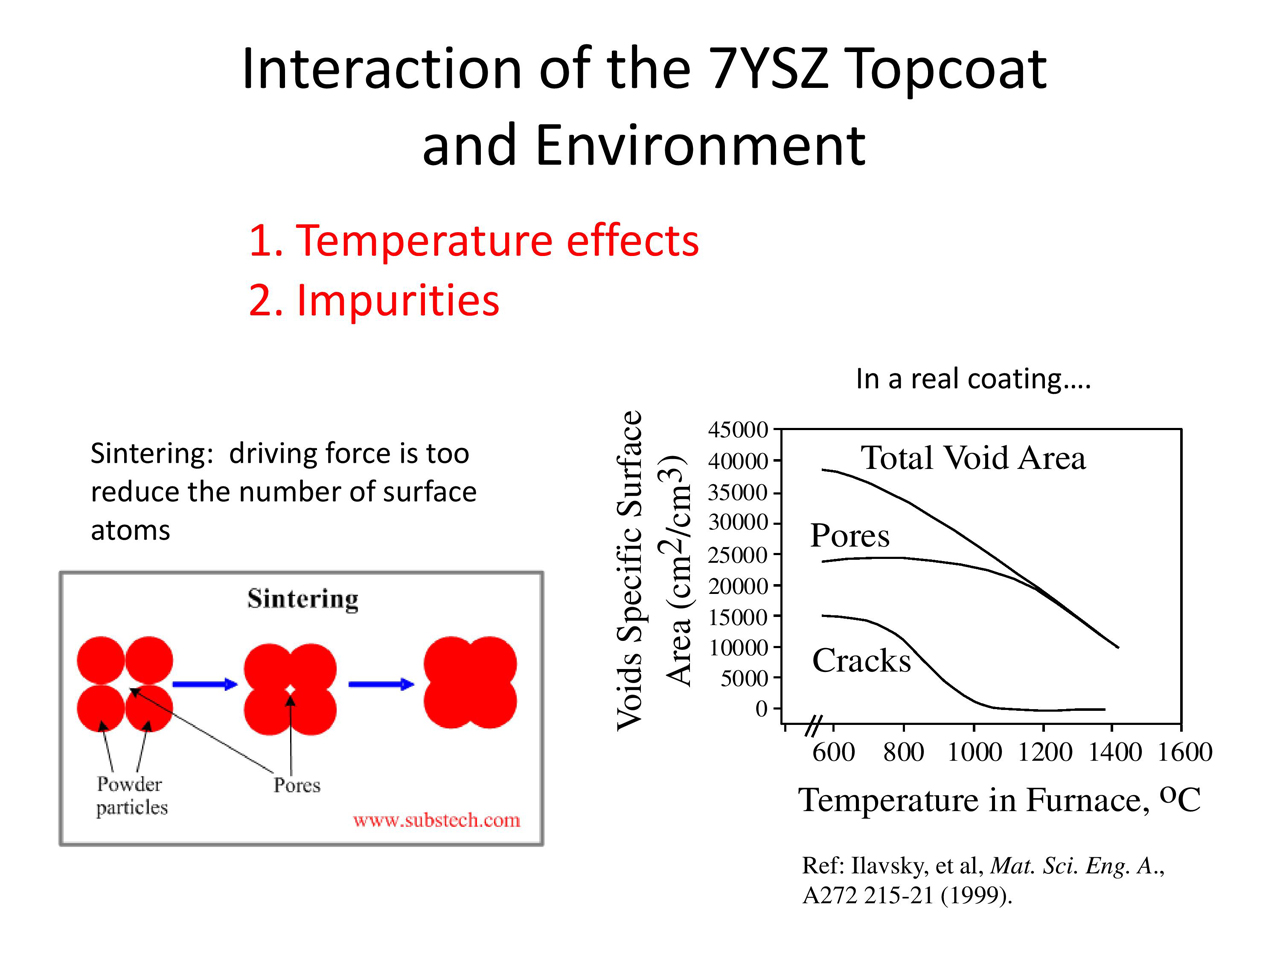 Interaction of the 7YSZ Topcoat and Environment